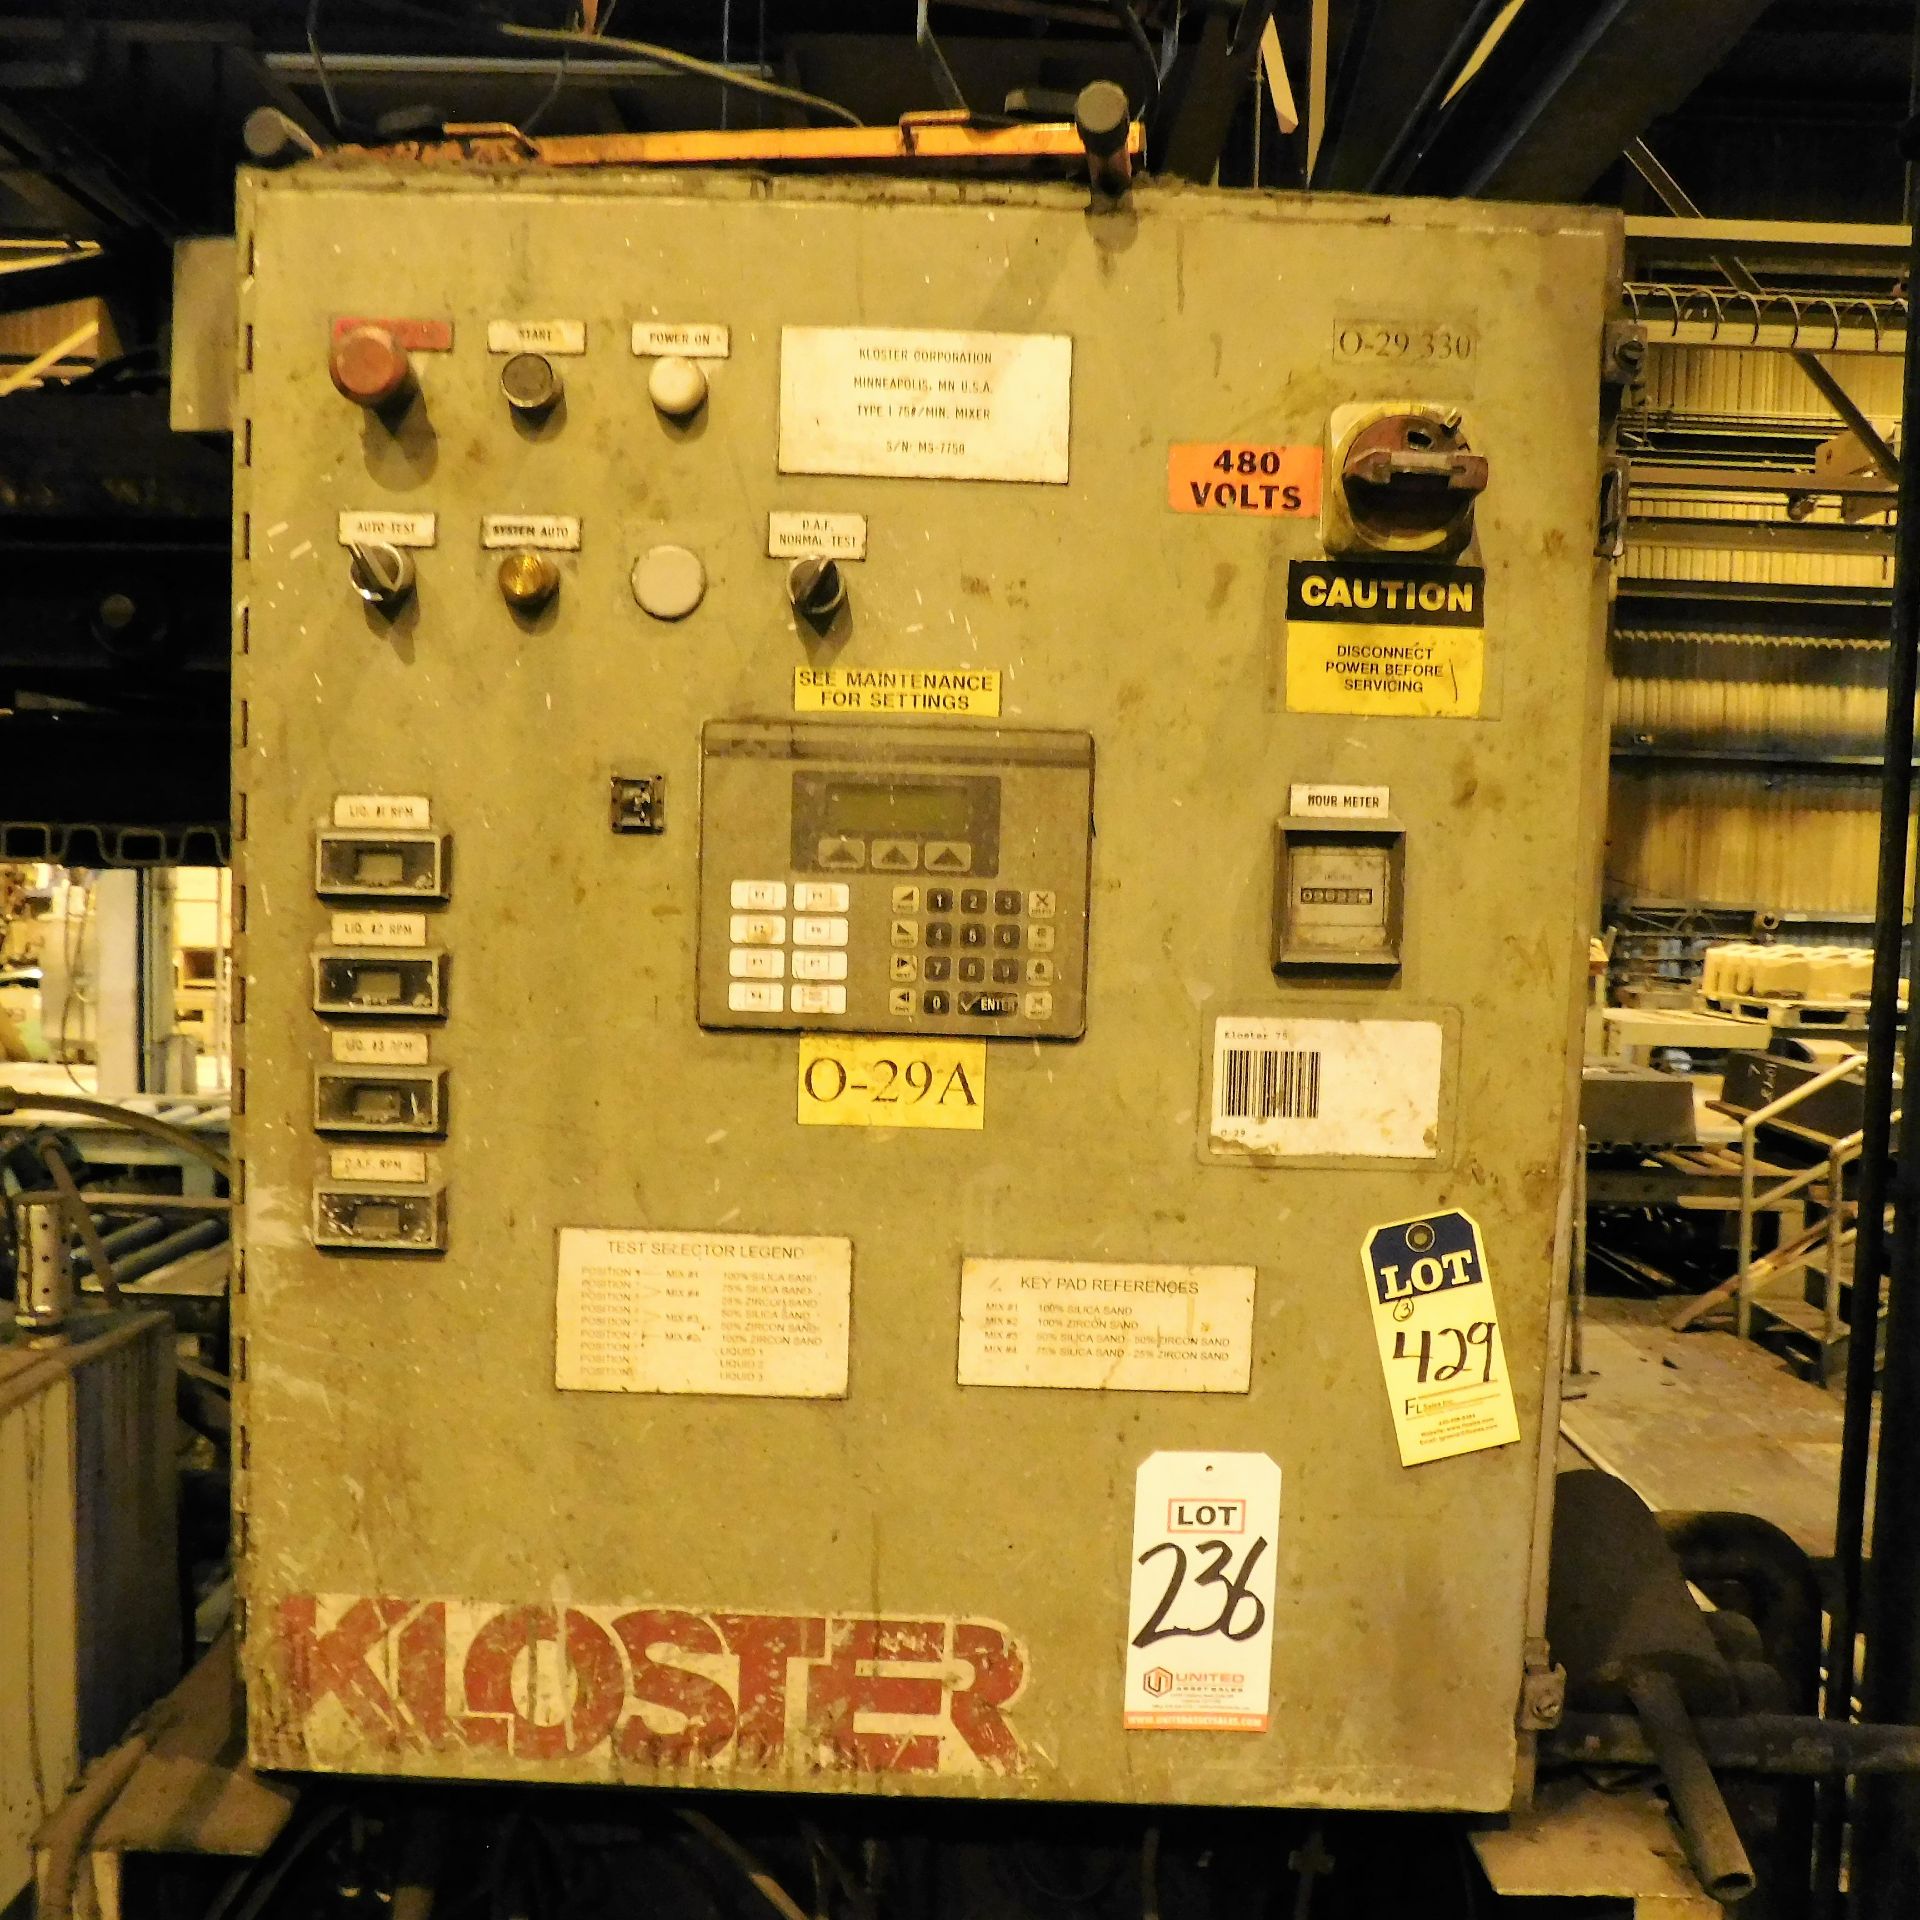 75# KLOSTER CONTINUOUS MIXER W/ PUMPS - Image 3 of 3